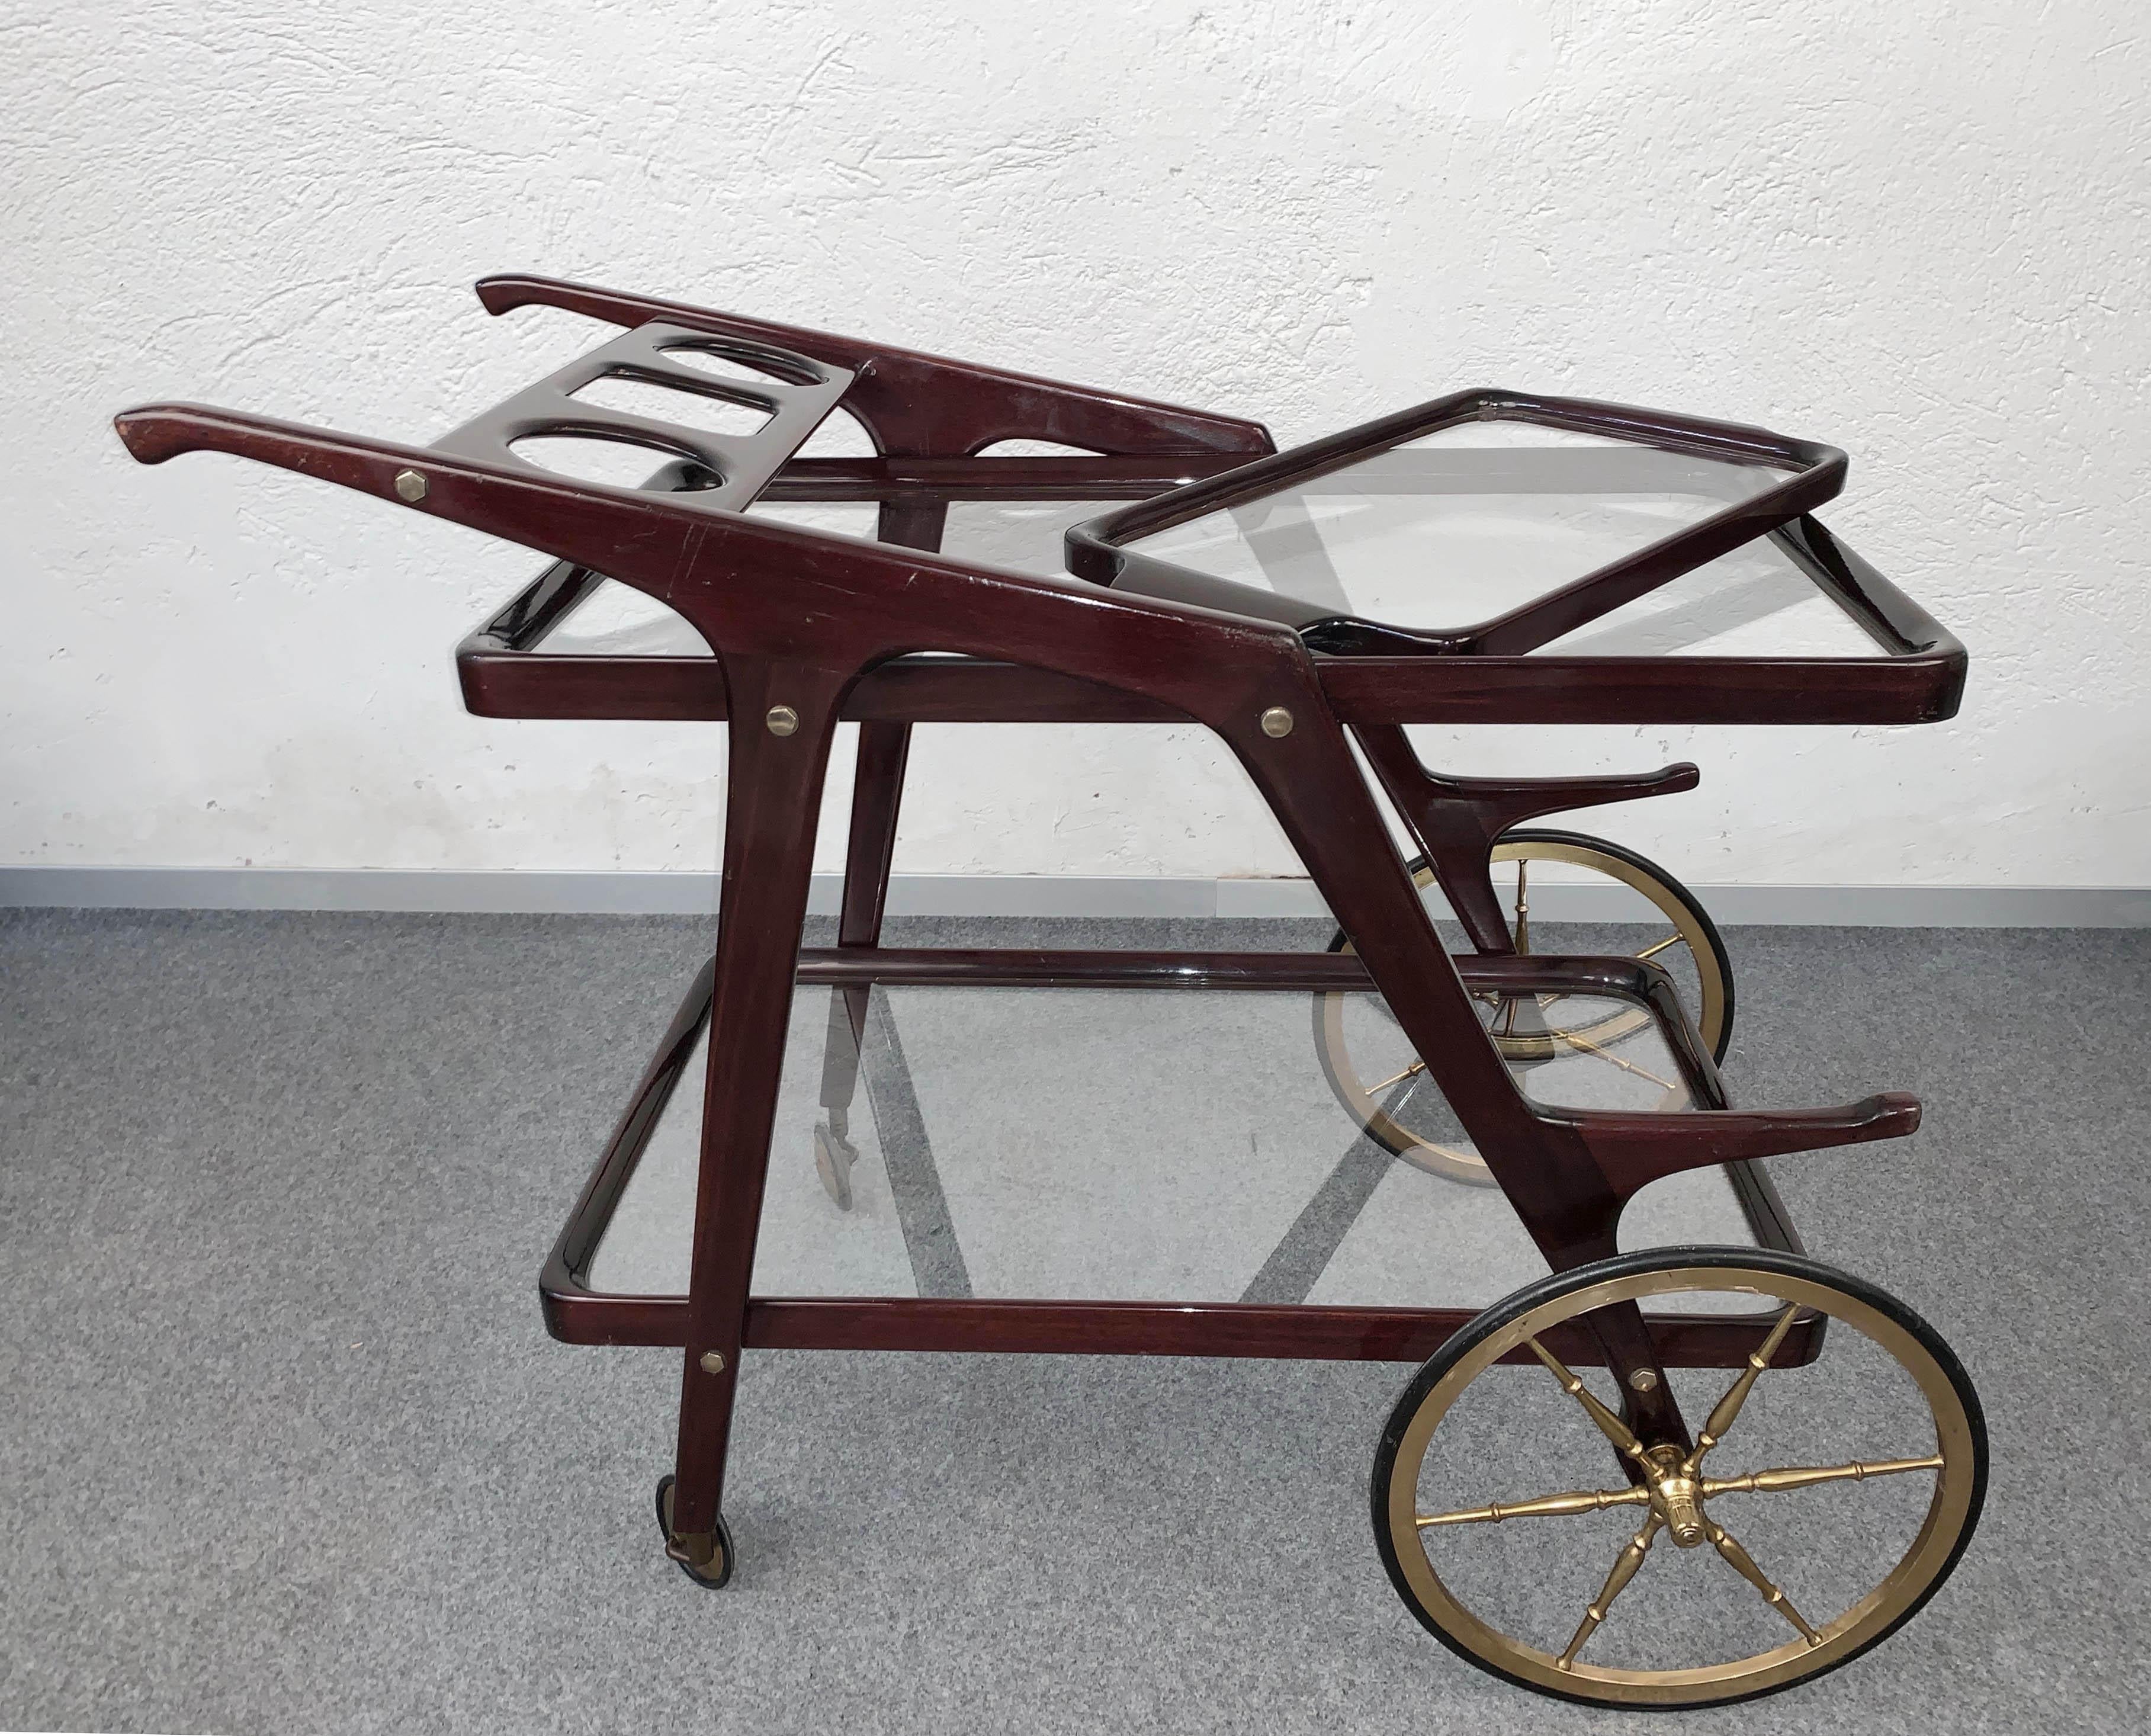 Fantastic midcentury wood bar cart with glass serving trays. This piece is attributed to Cesare Lacca and it was designed in Italy during 1950s.

This wonderful piece comes with a removable glass tray and has an ergonomic bottle holder, while the